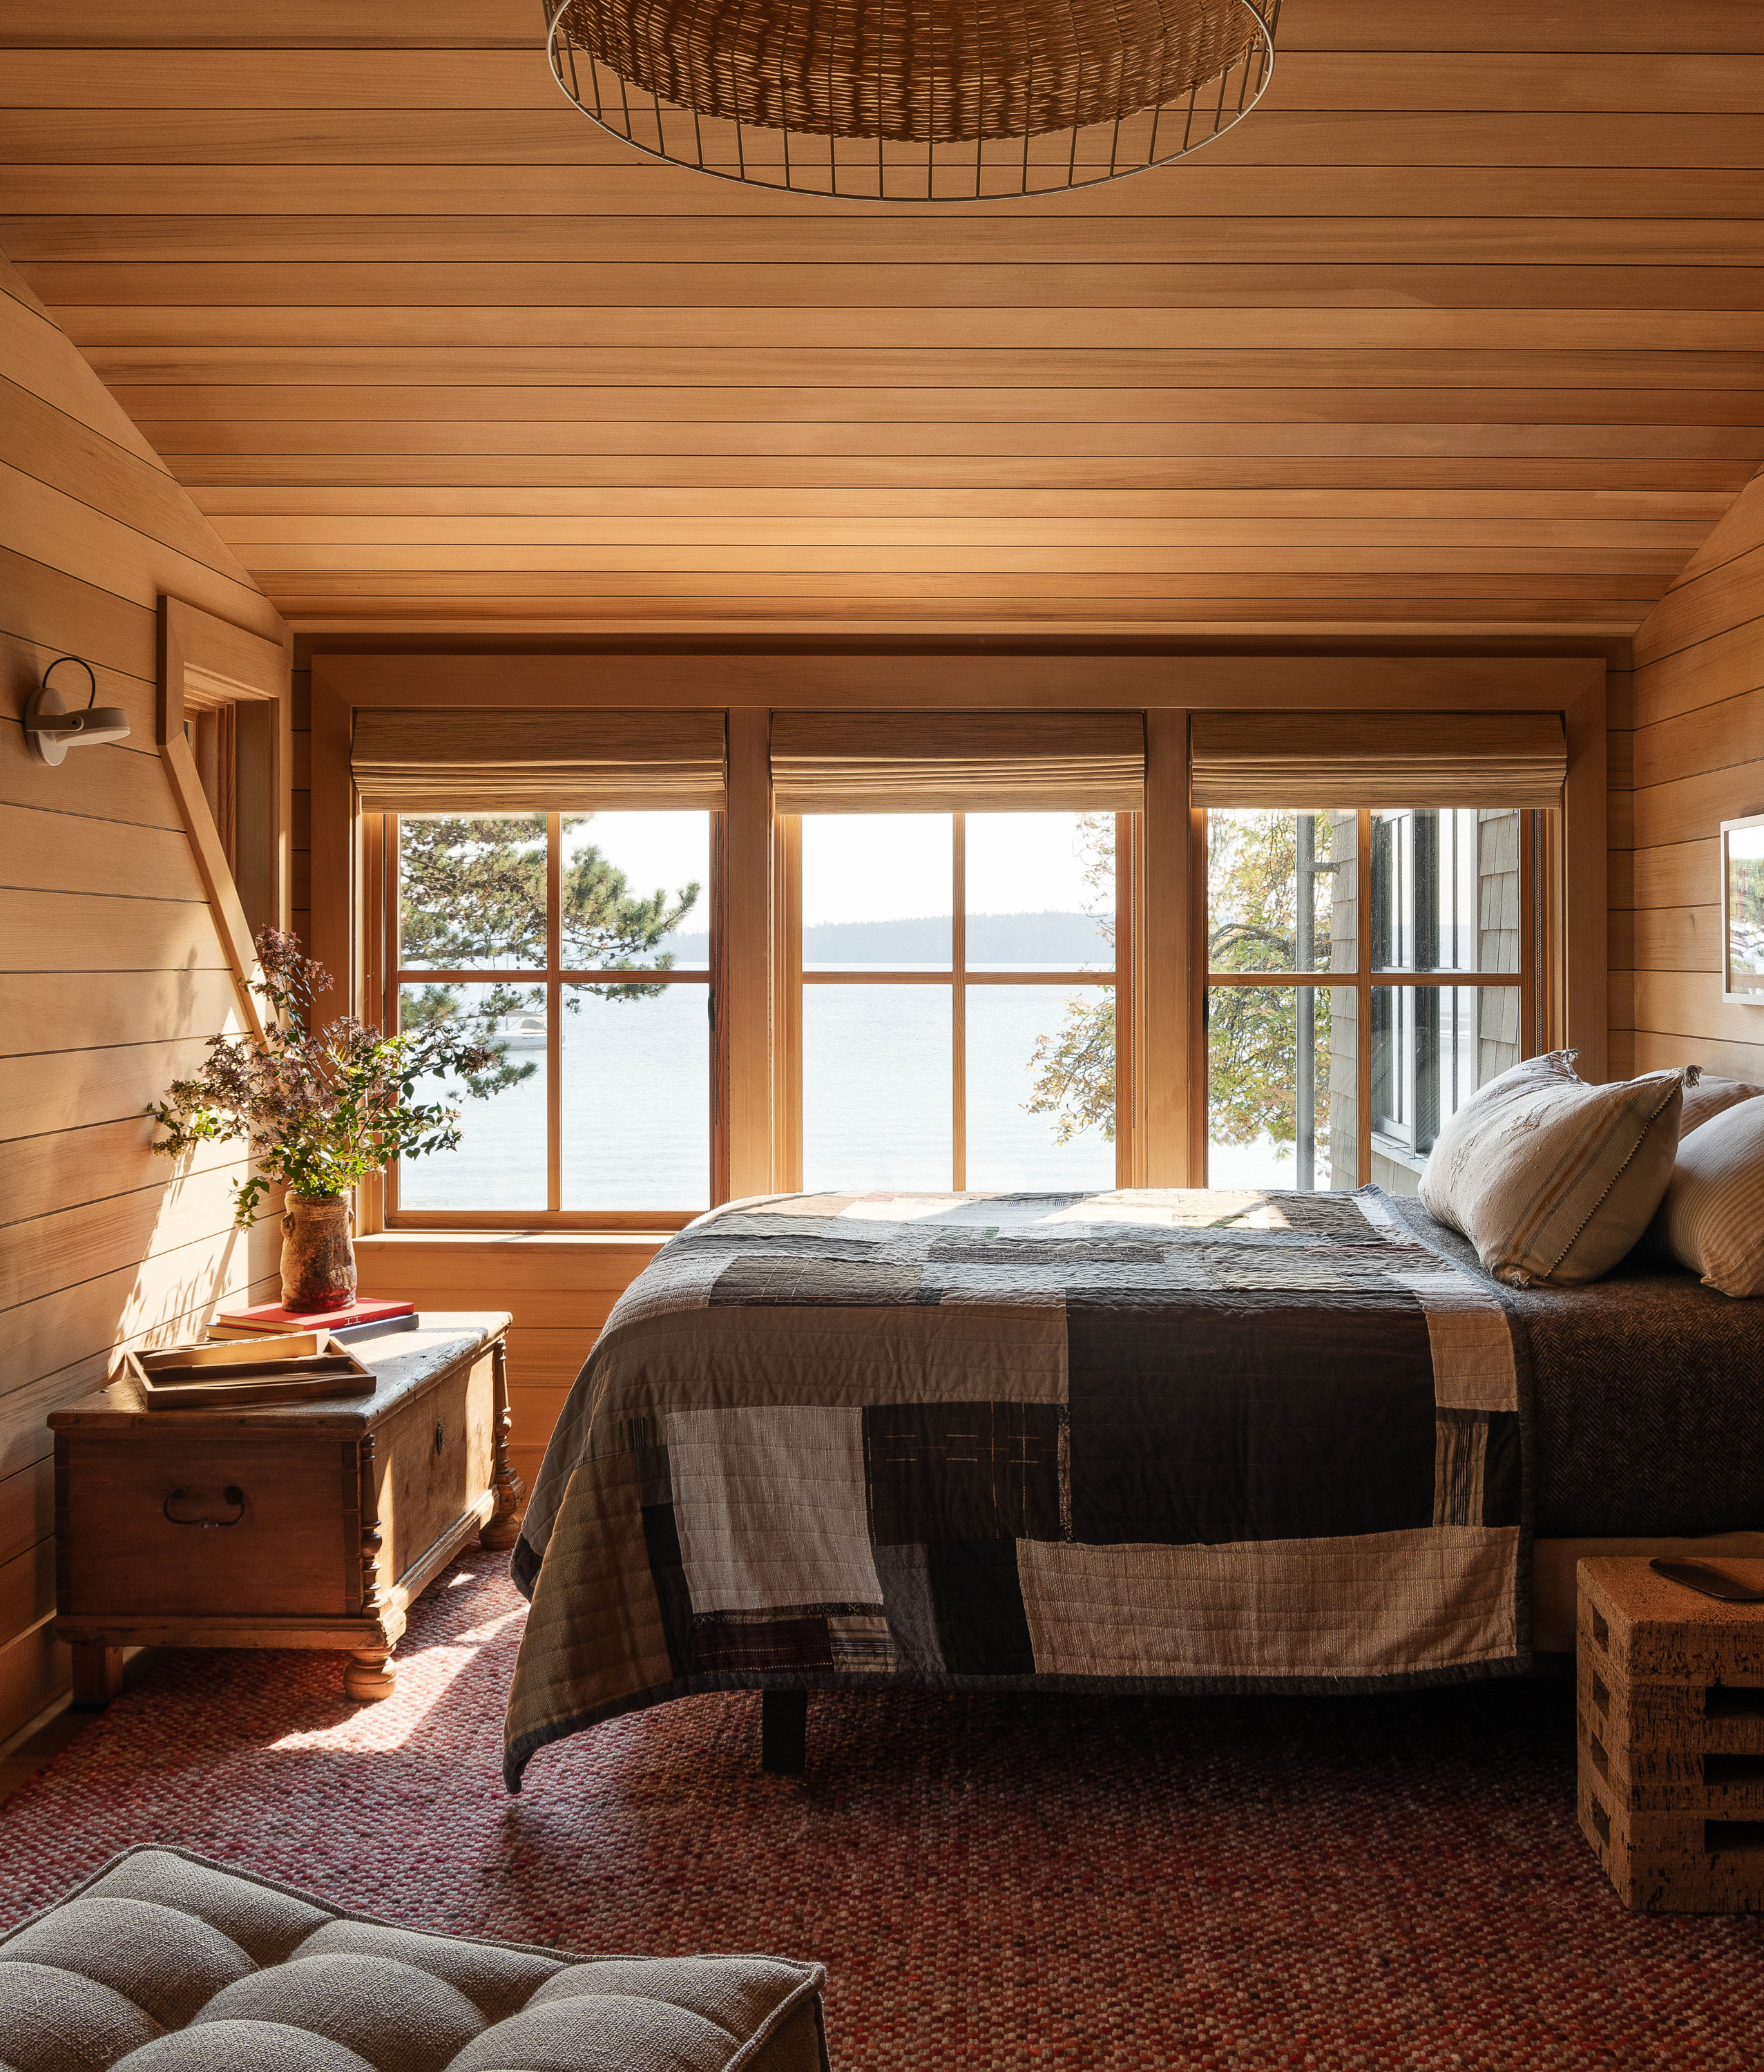 The bed in this room, once an extra lounge space, now serves as a cozy retreat with views of the lower pine boughs and the cityscape across the sound, capturing the essence of a waterfront treehouse